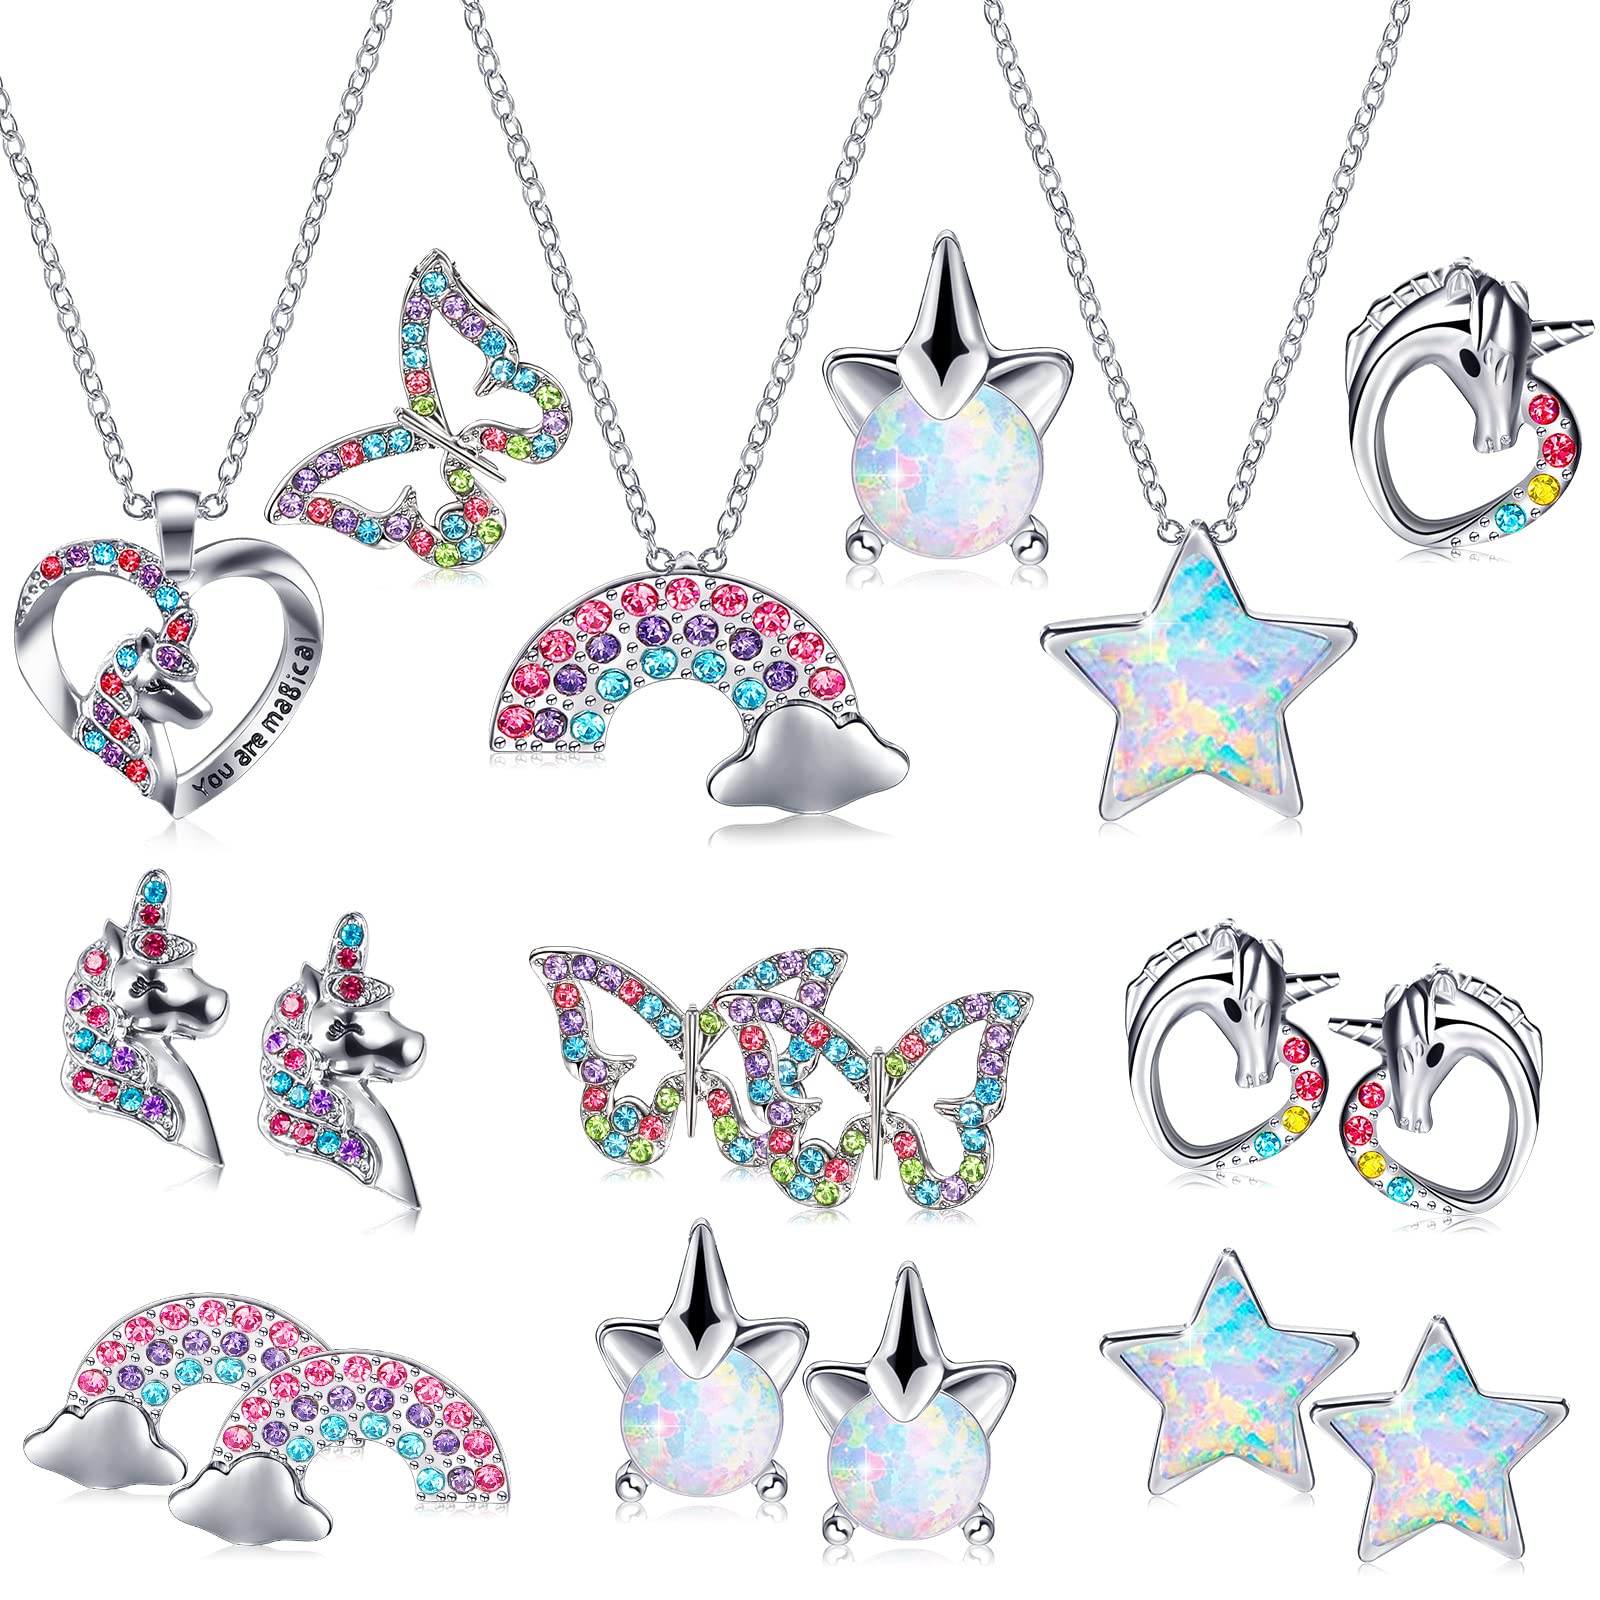 18 Pack Girls Earrings and Necklace Set Unicorn Heart Butterfly Star Necklace Kids Earrings Rainbow Unicorn Accessories for Women Girl Jewelry Set with Sponge Filled Cardboard Jewelry Box with Lid